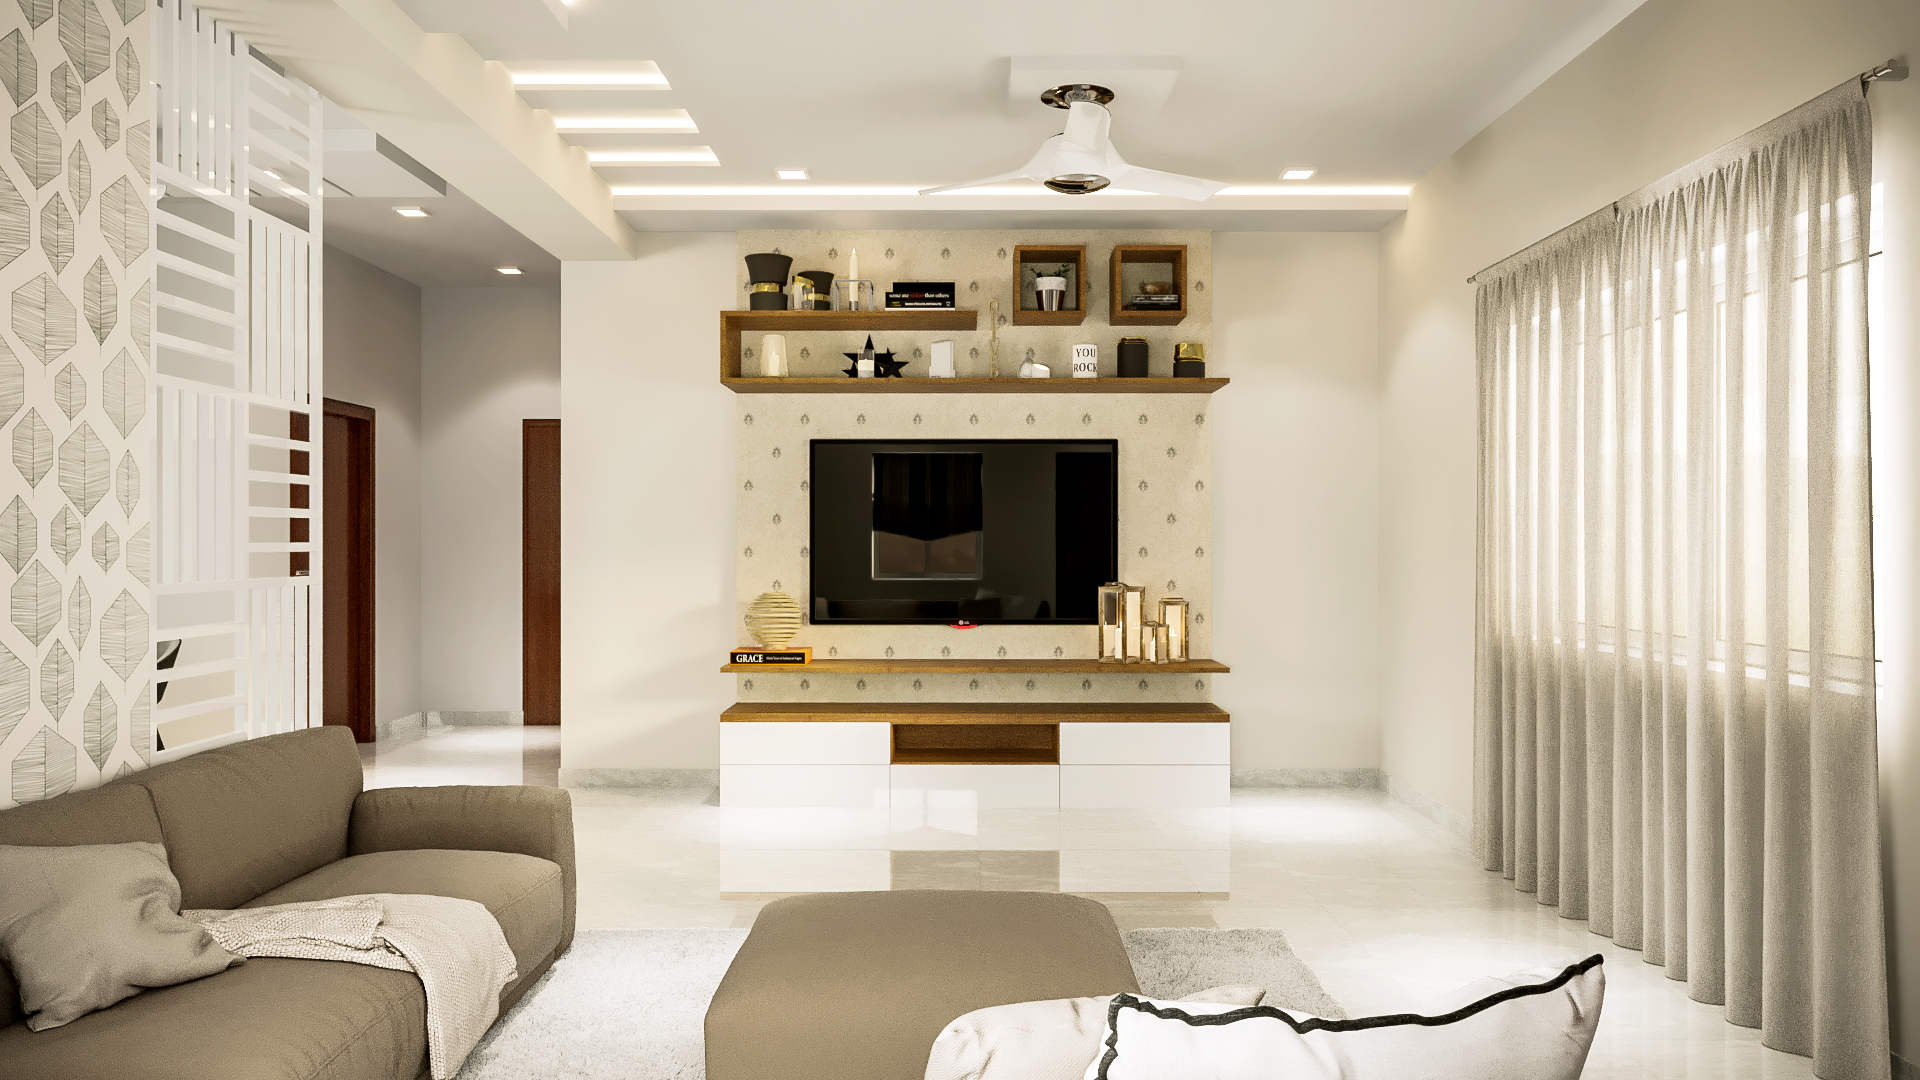 Modern Living Room Furniture Design: Transforming Your Home With Style And Comfort